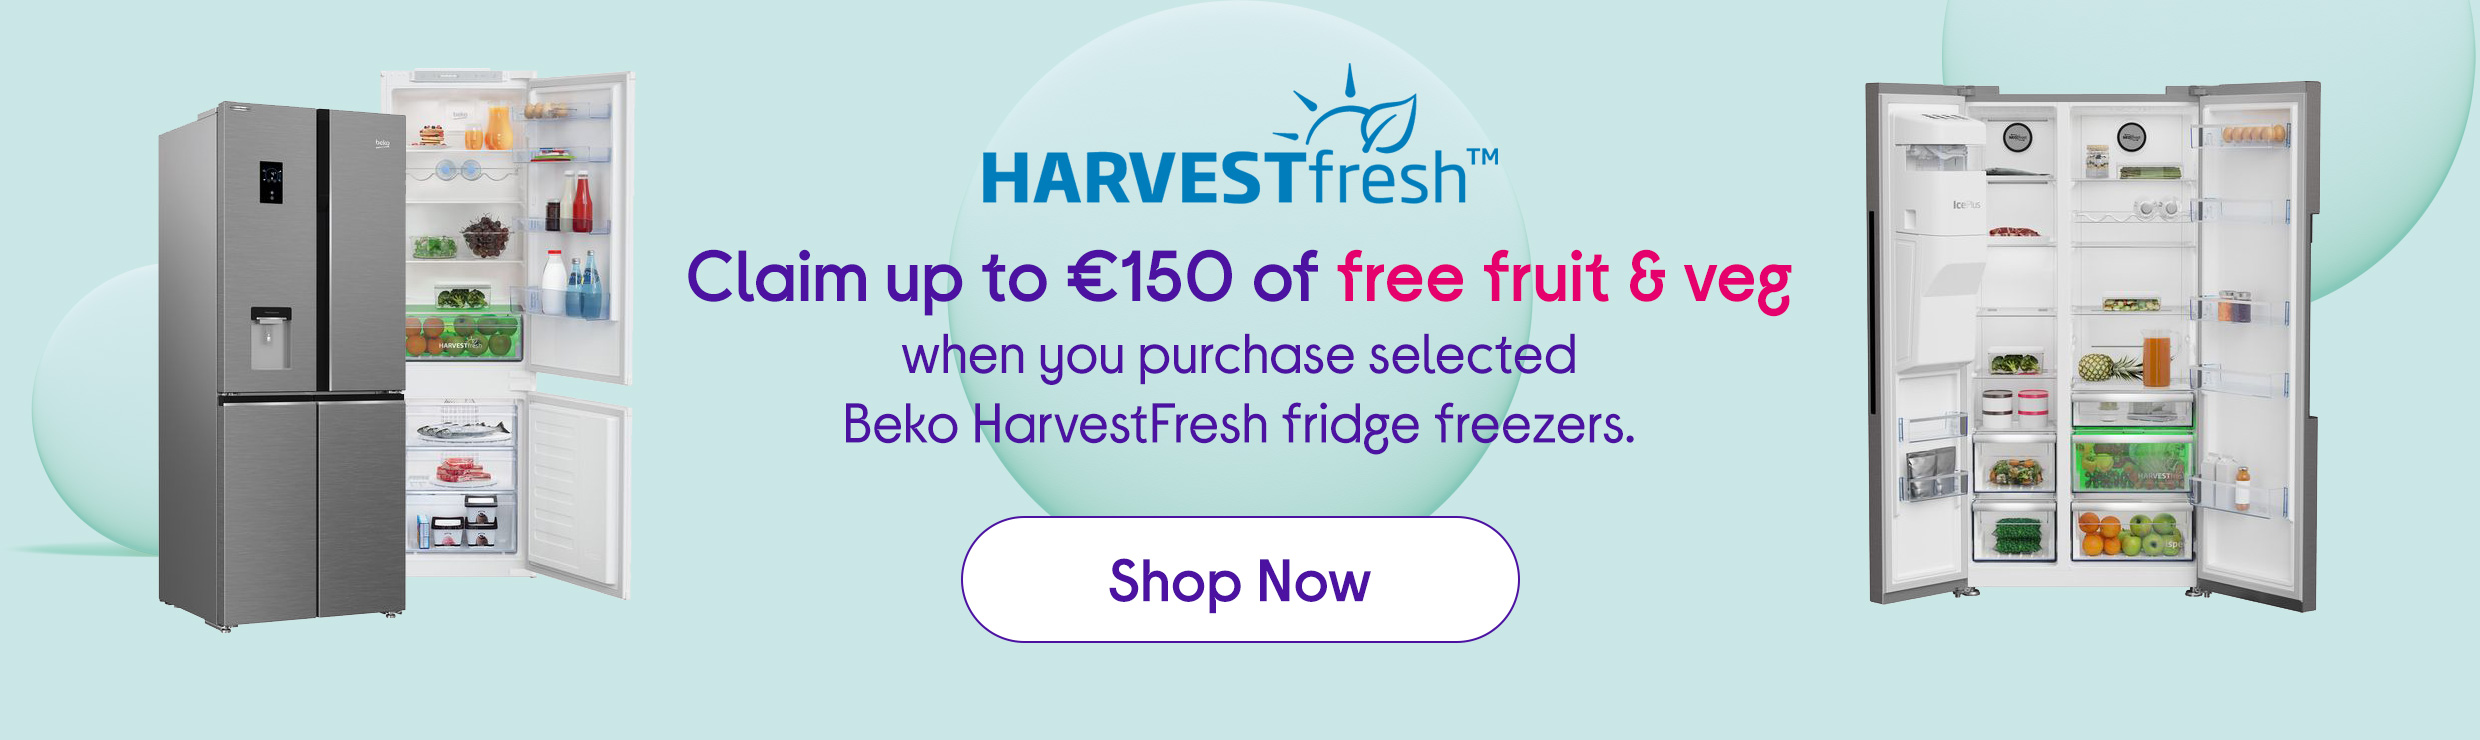 Claim up to €150 fruit and veg from Beko